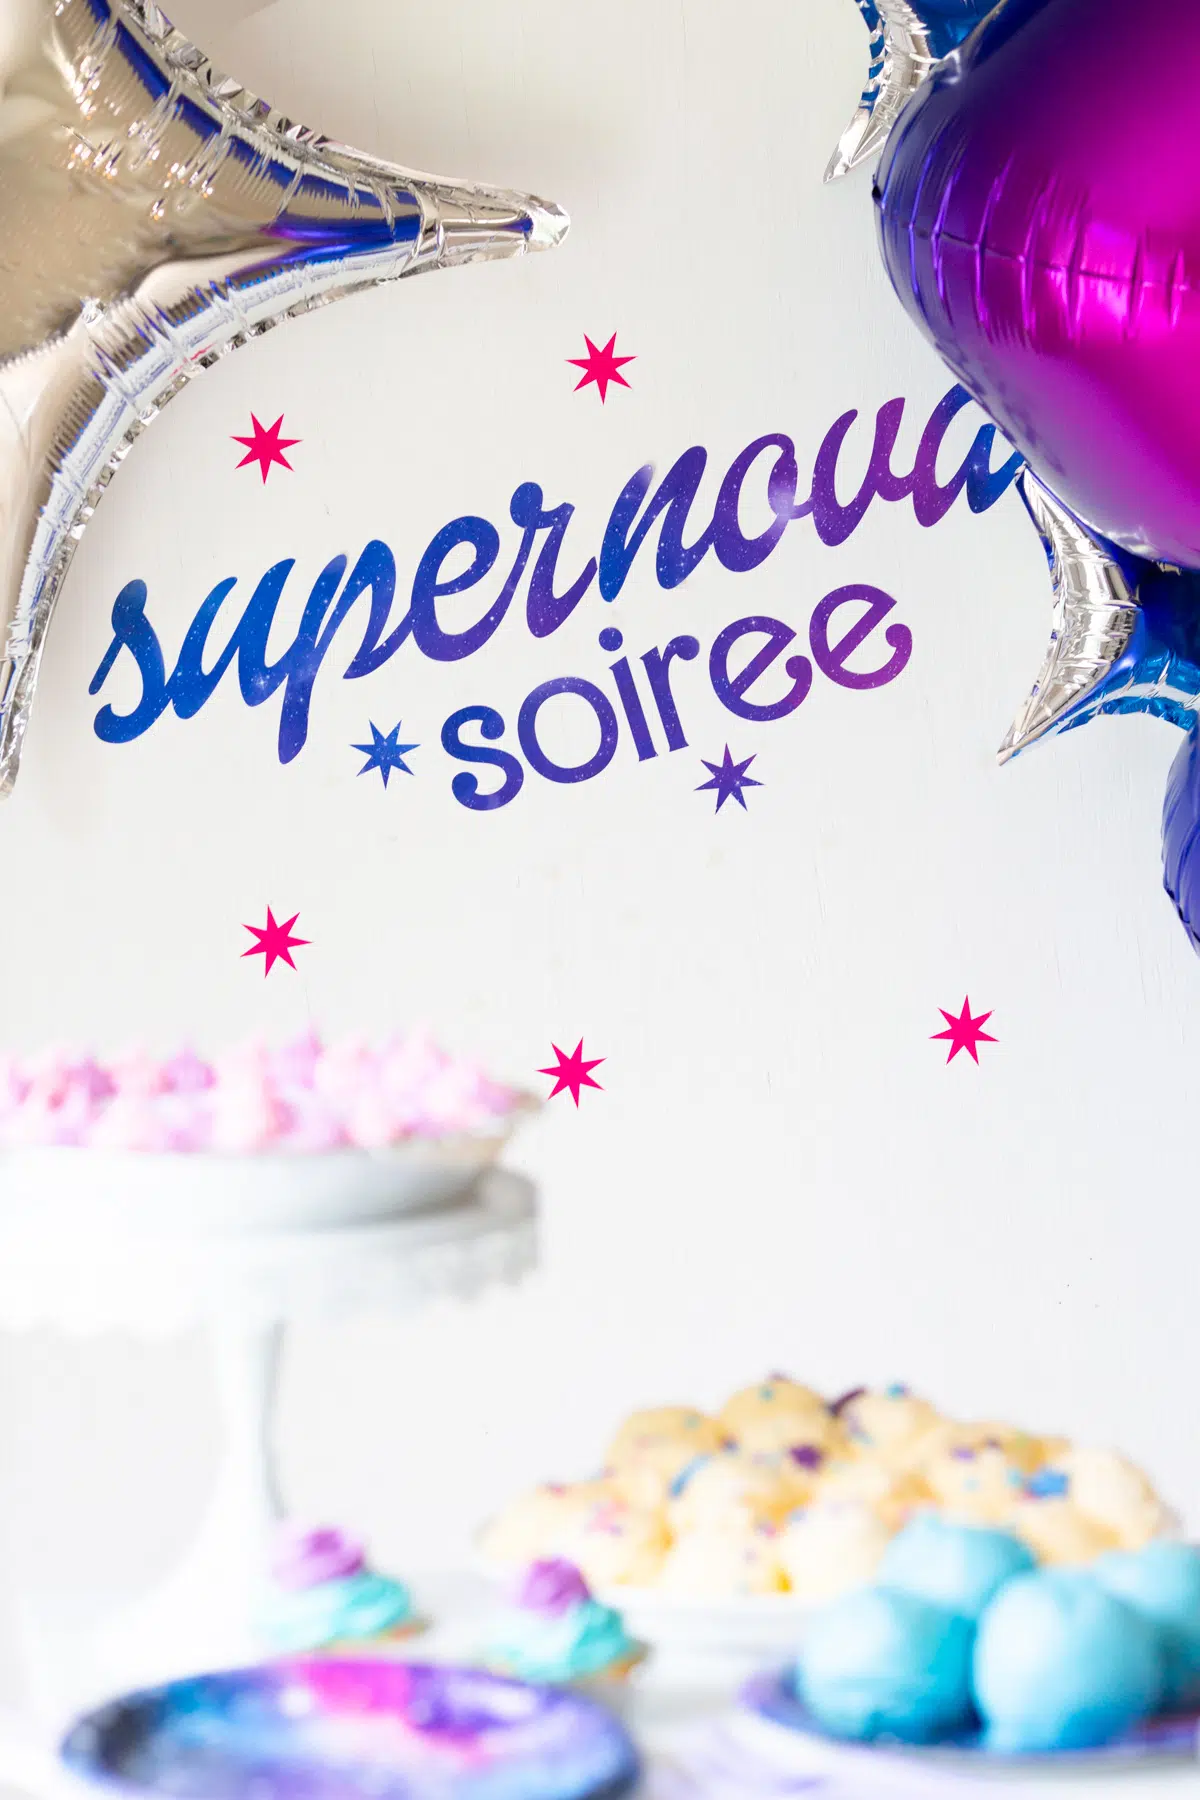 star trek prodigy party table with supernova soiree sign